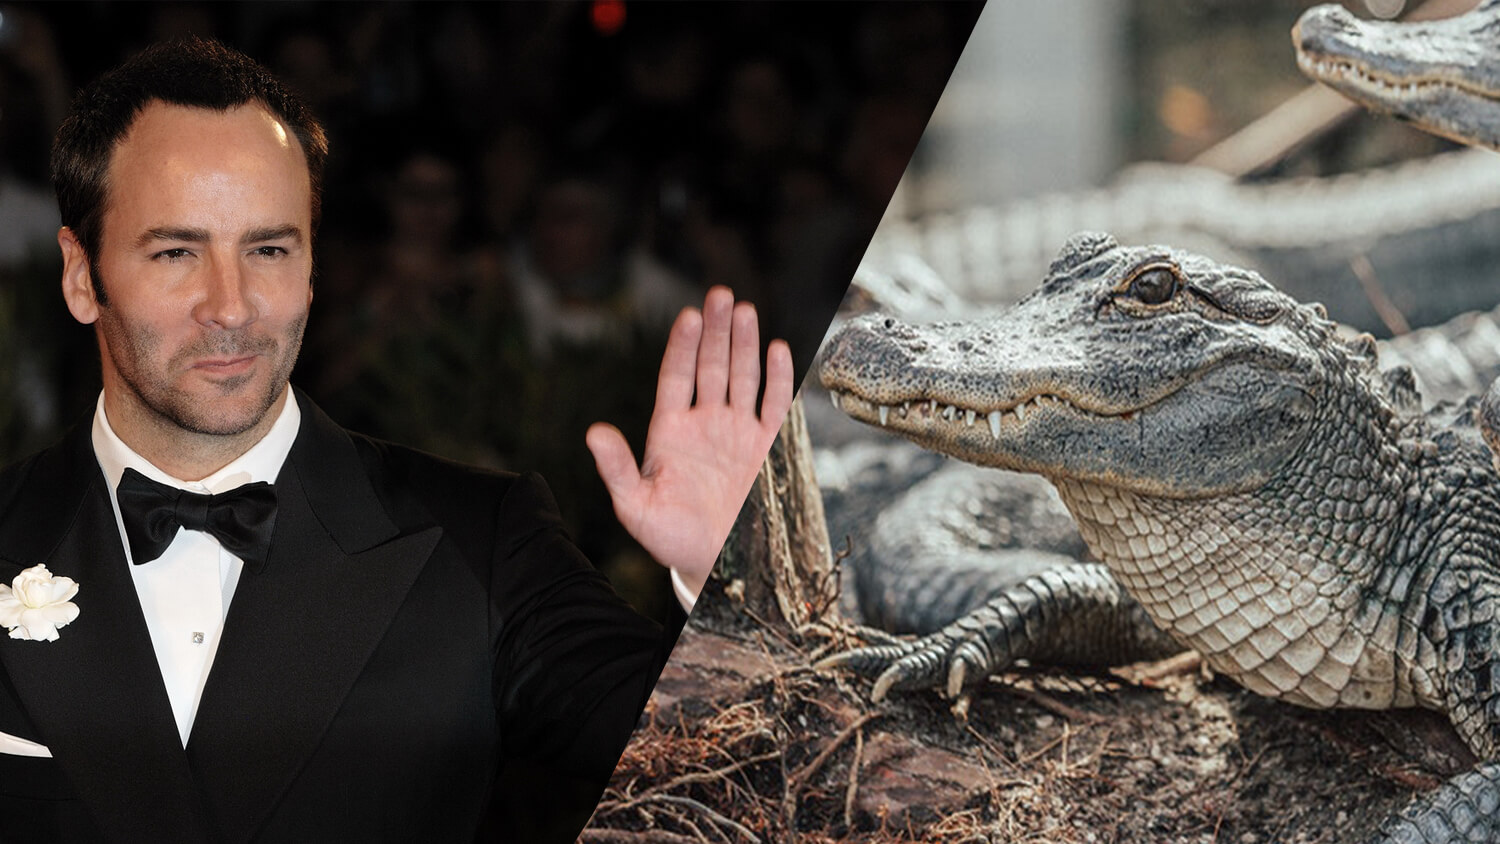 Vegan Designer Tom Ford Launches Cruelty-Free Crocodile Leather at New York Fashion Week